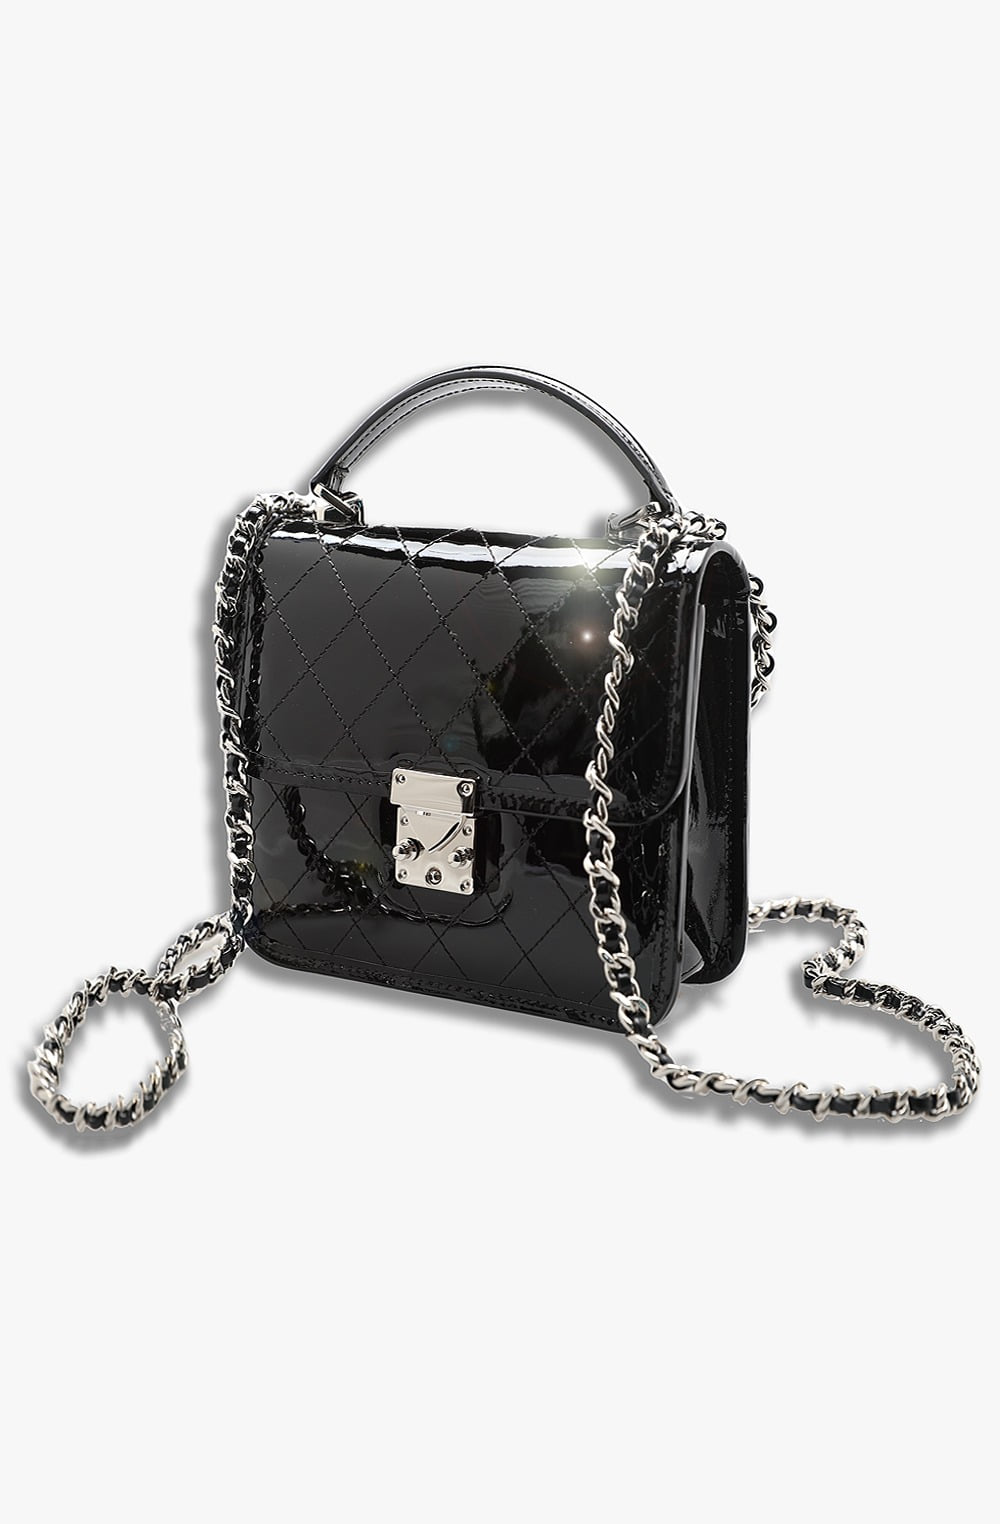 Myeyeko Exclusive Line - SOPHIA BAG (Leather by, FAEDA MADE IN ITALY) Black&amp;Silver